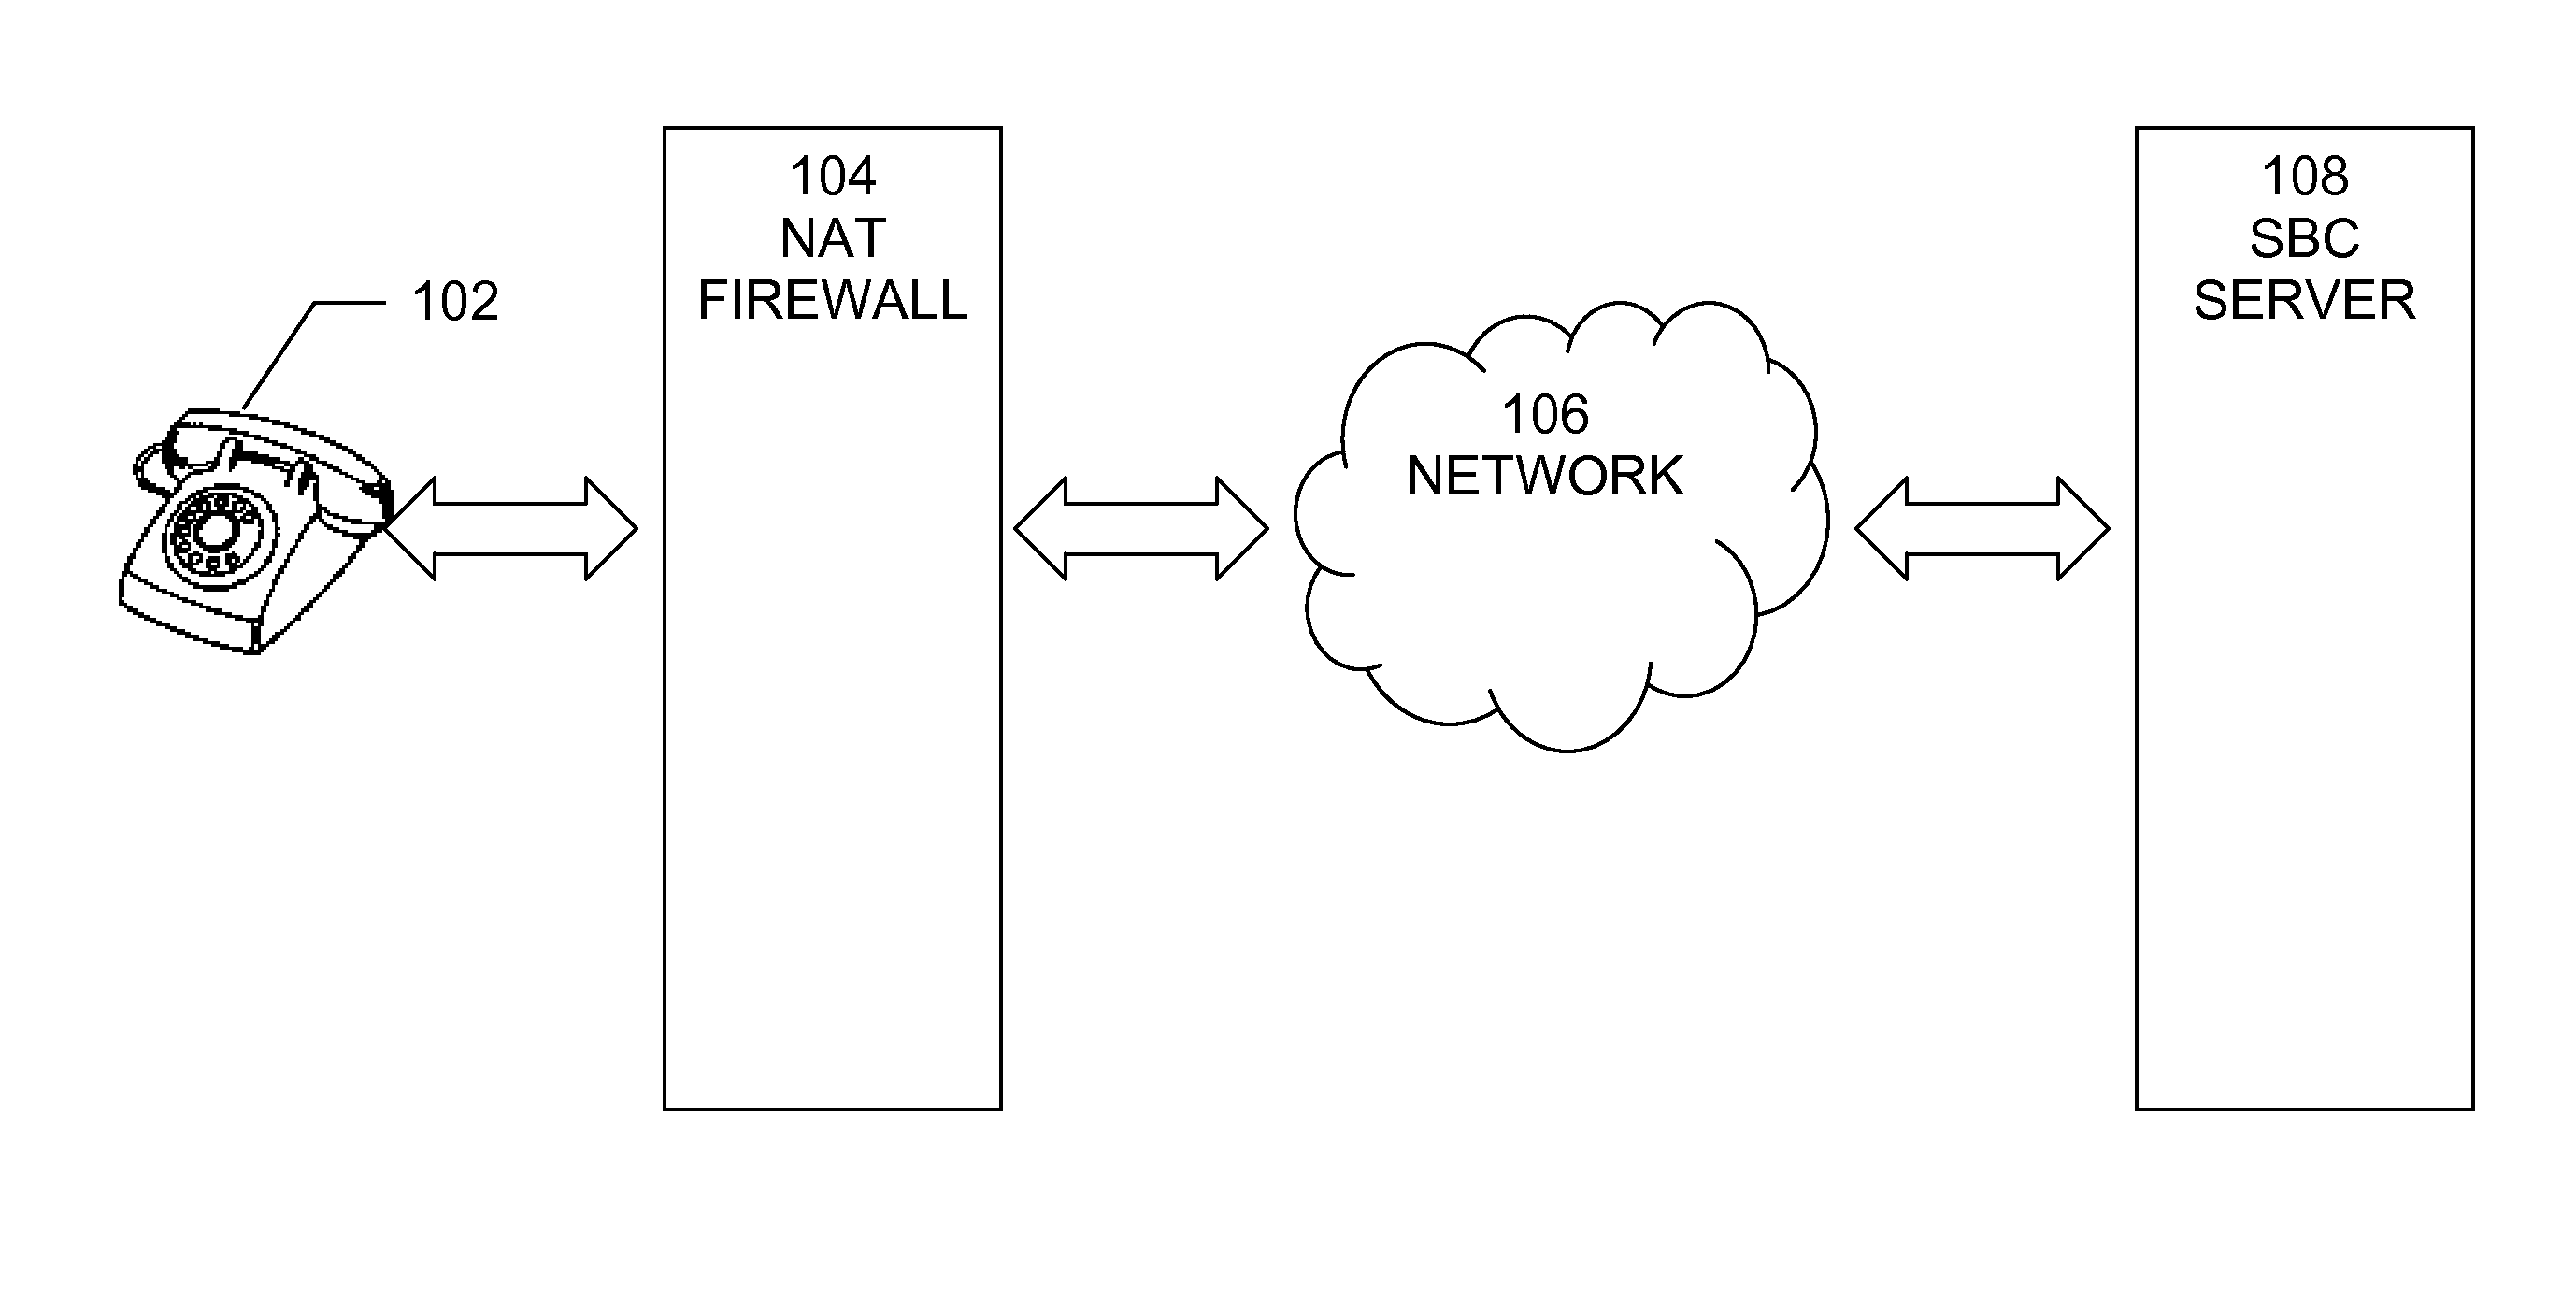 Detecting the type of NAT firewall using messages